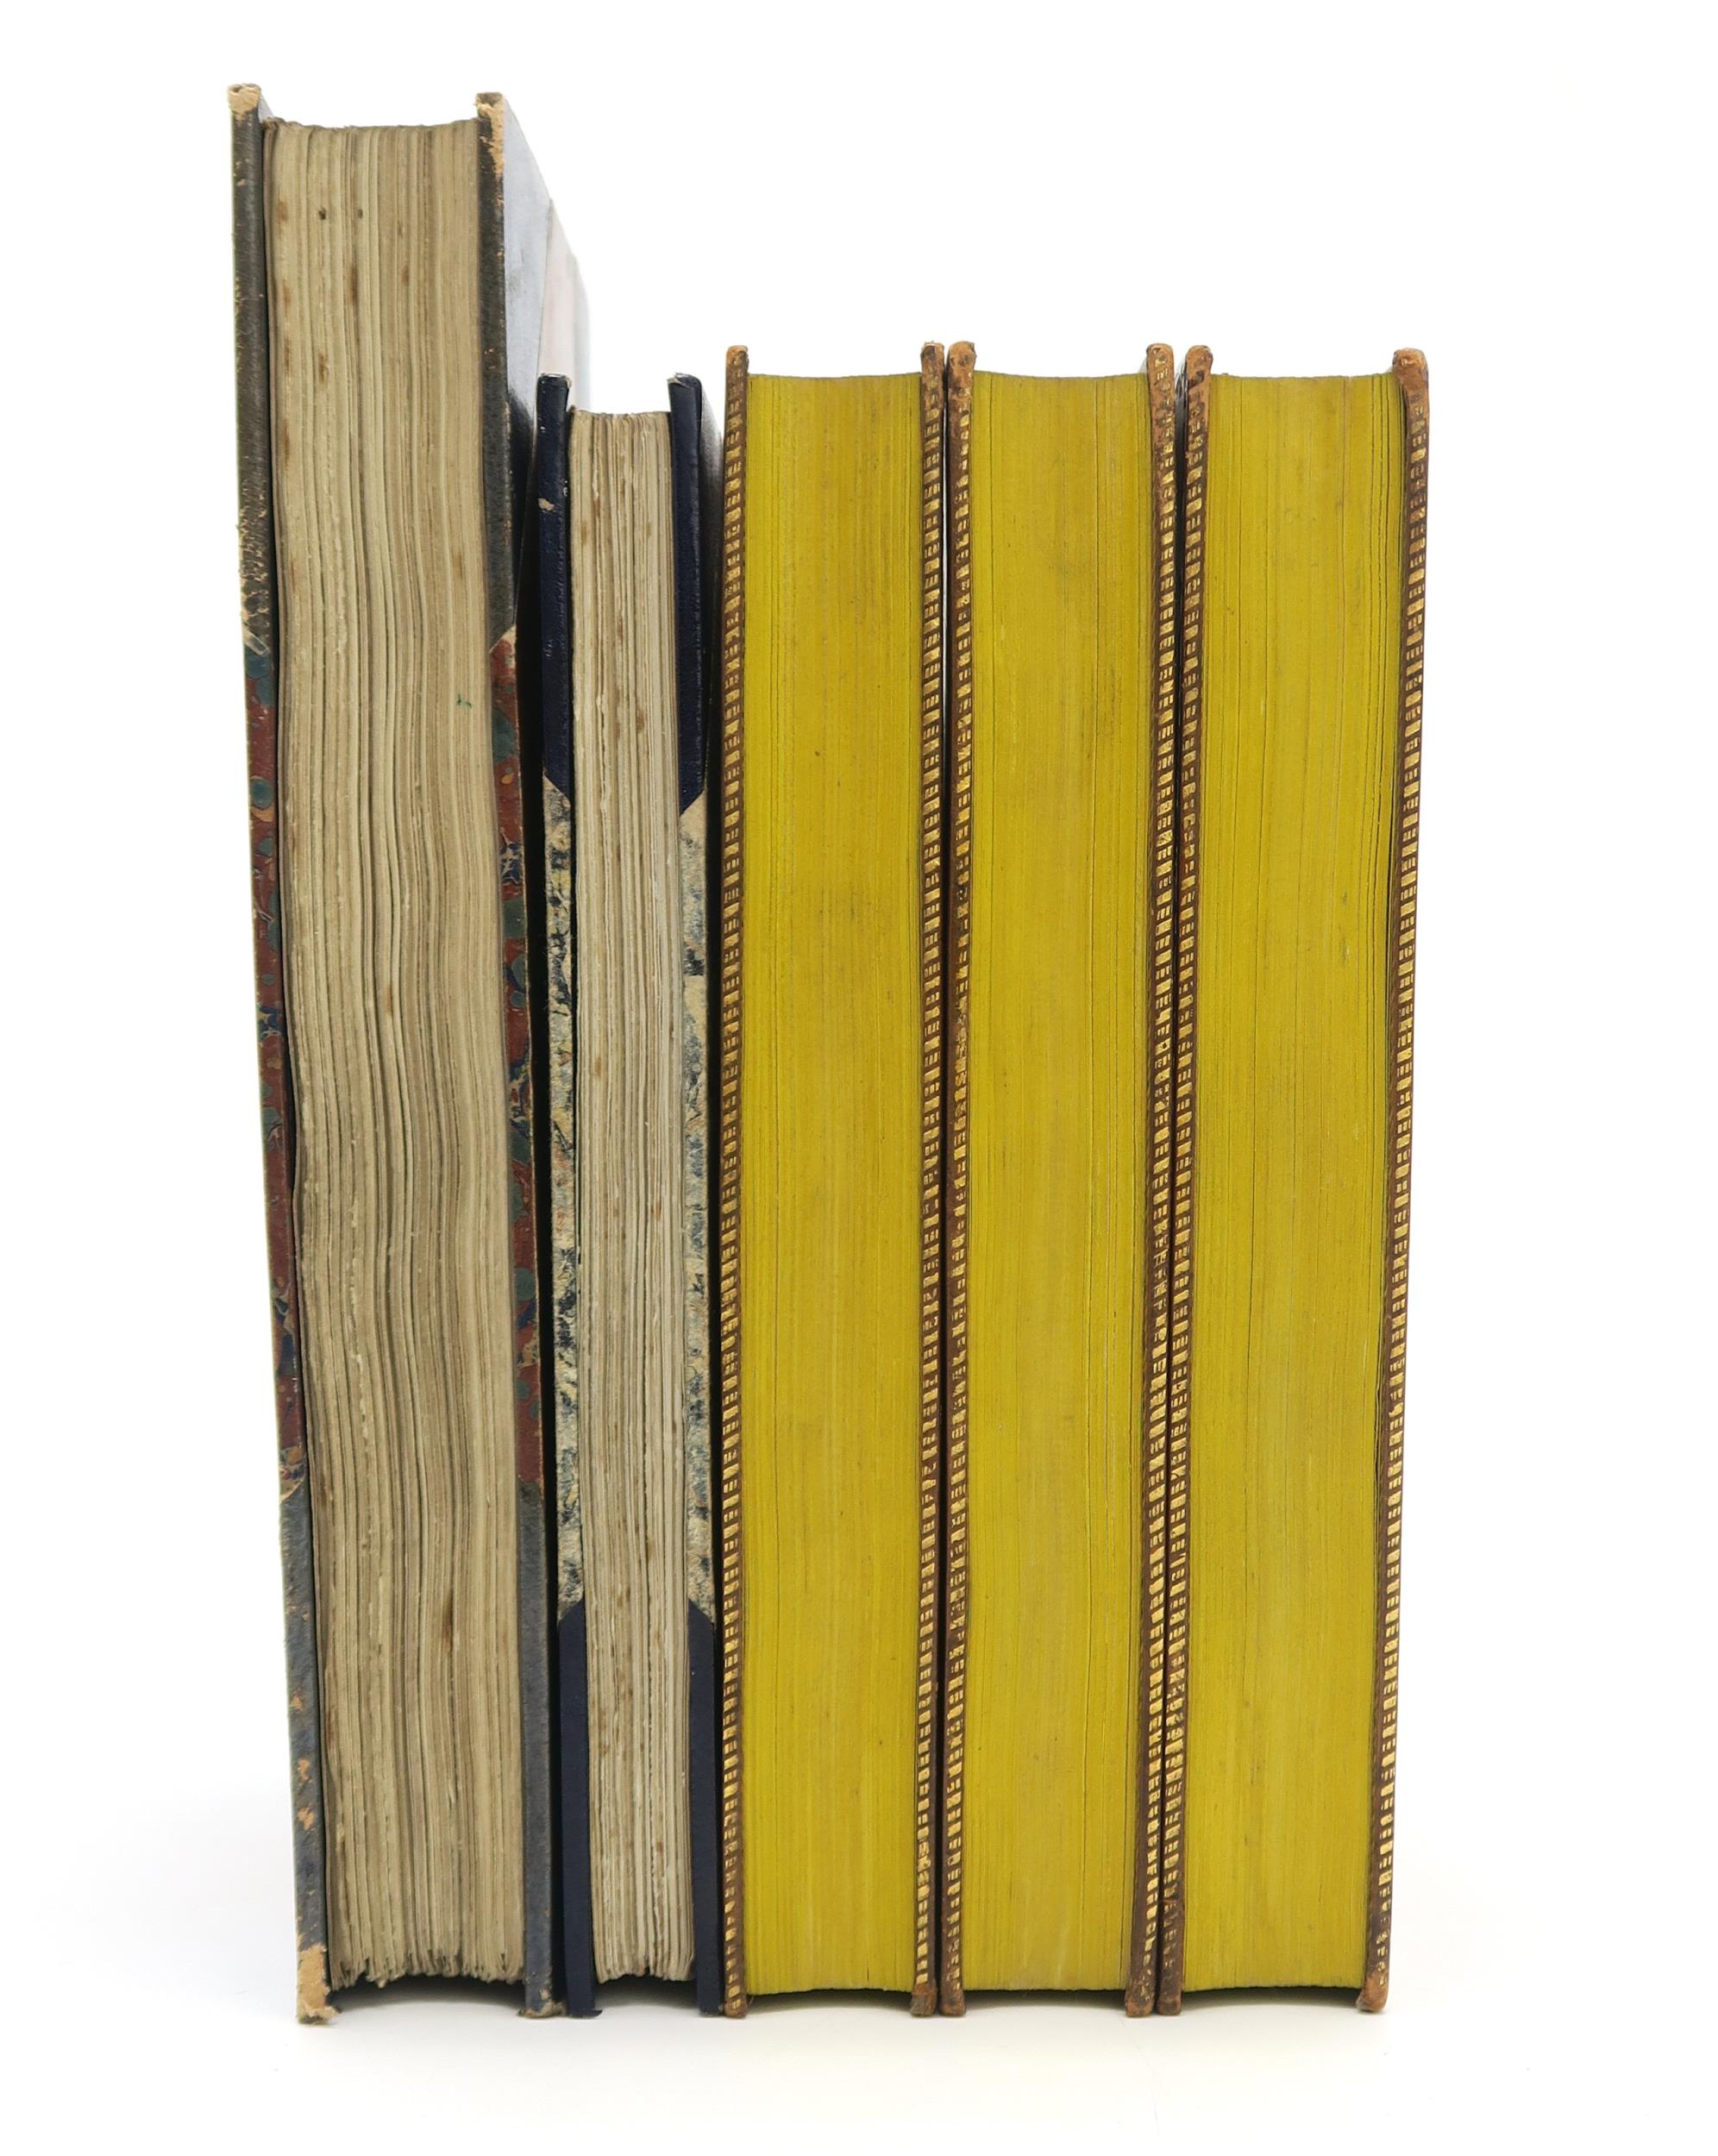 FINE BINDINGS Chaucer, Geoffrey Romaunt of the Rose Troilus and Creseide and the Minor Poems With - Image 2 of 7